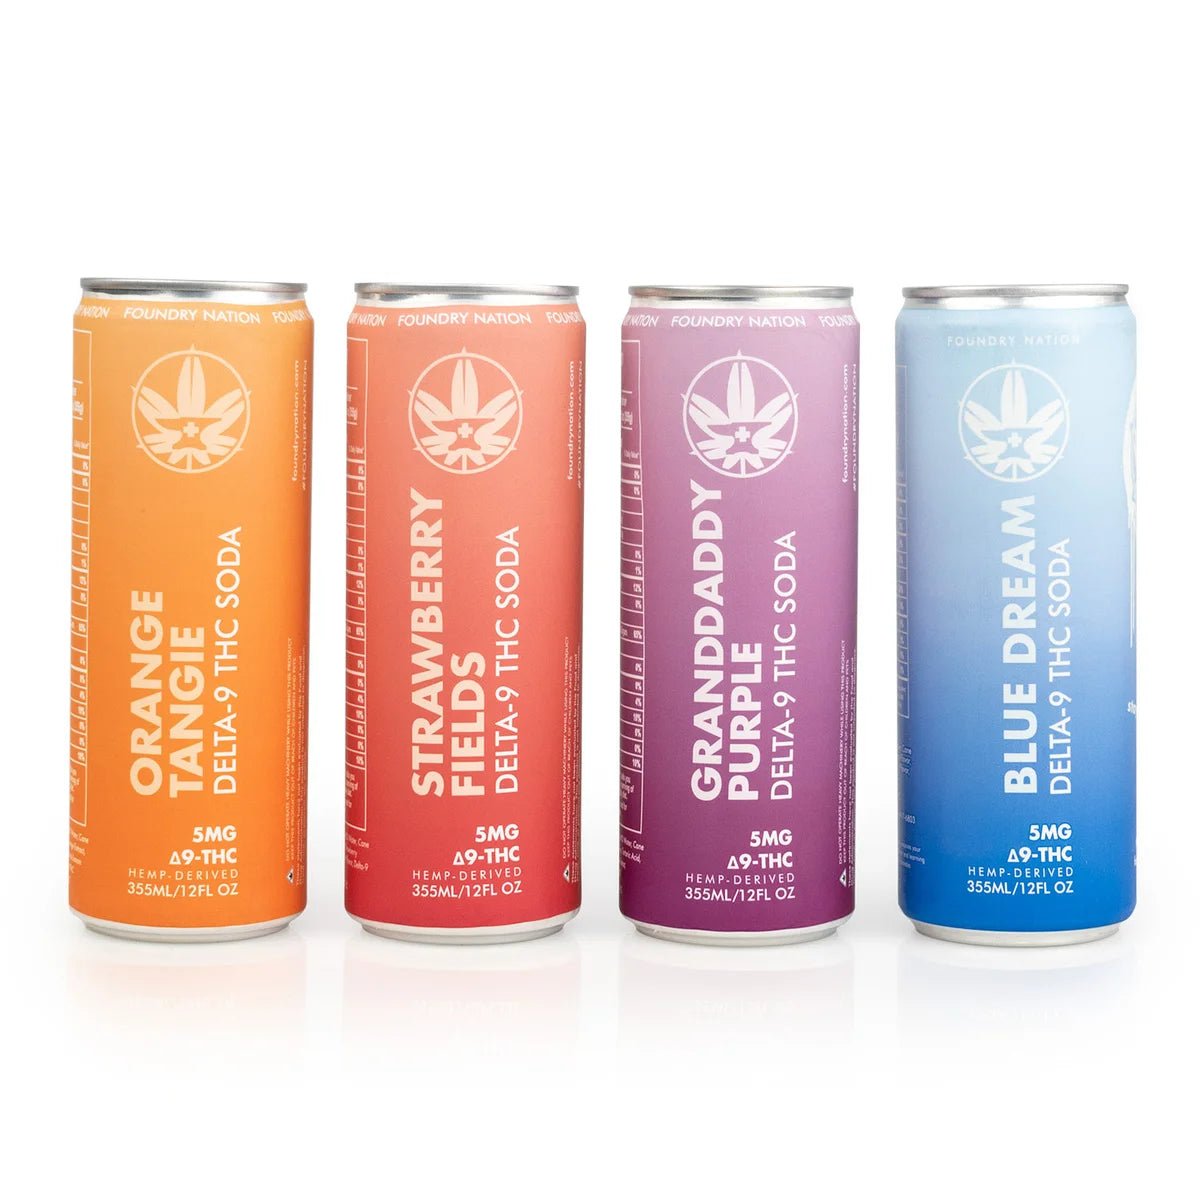 FOUNDRY NATION Infused SODA 5mg THC (4 Flavors)